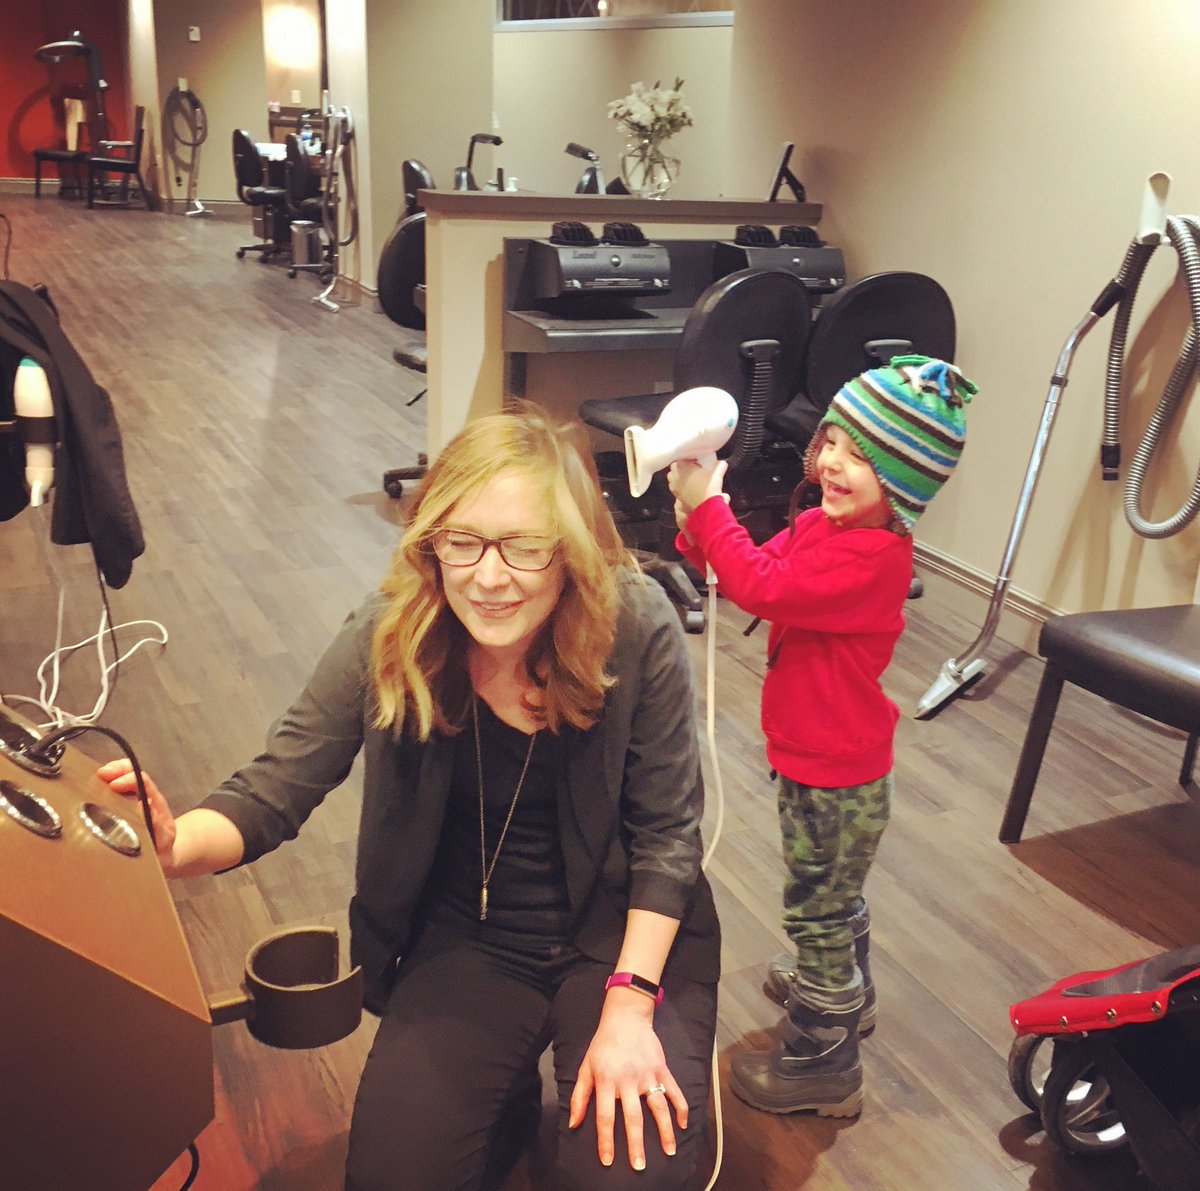 In honor of #HairstylistAppreciationDay, #throwback to that time my little guy decided @Lauren_Deme needed the hot air! Thanks, LB! #toughcustomer